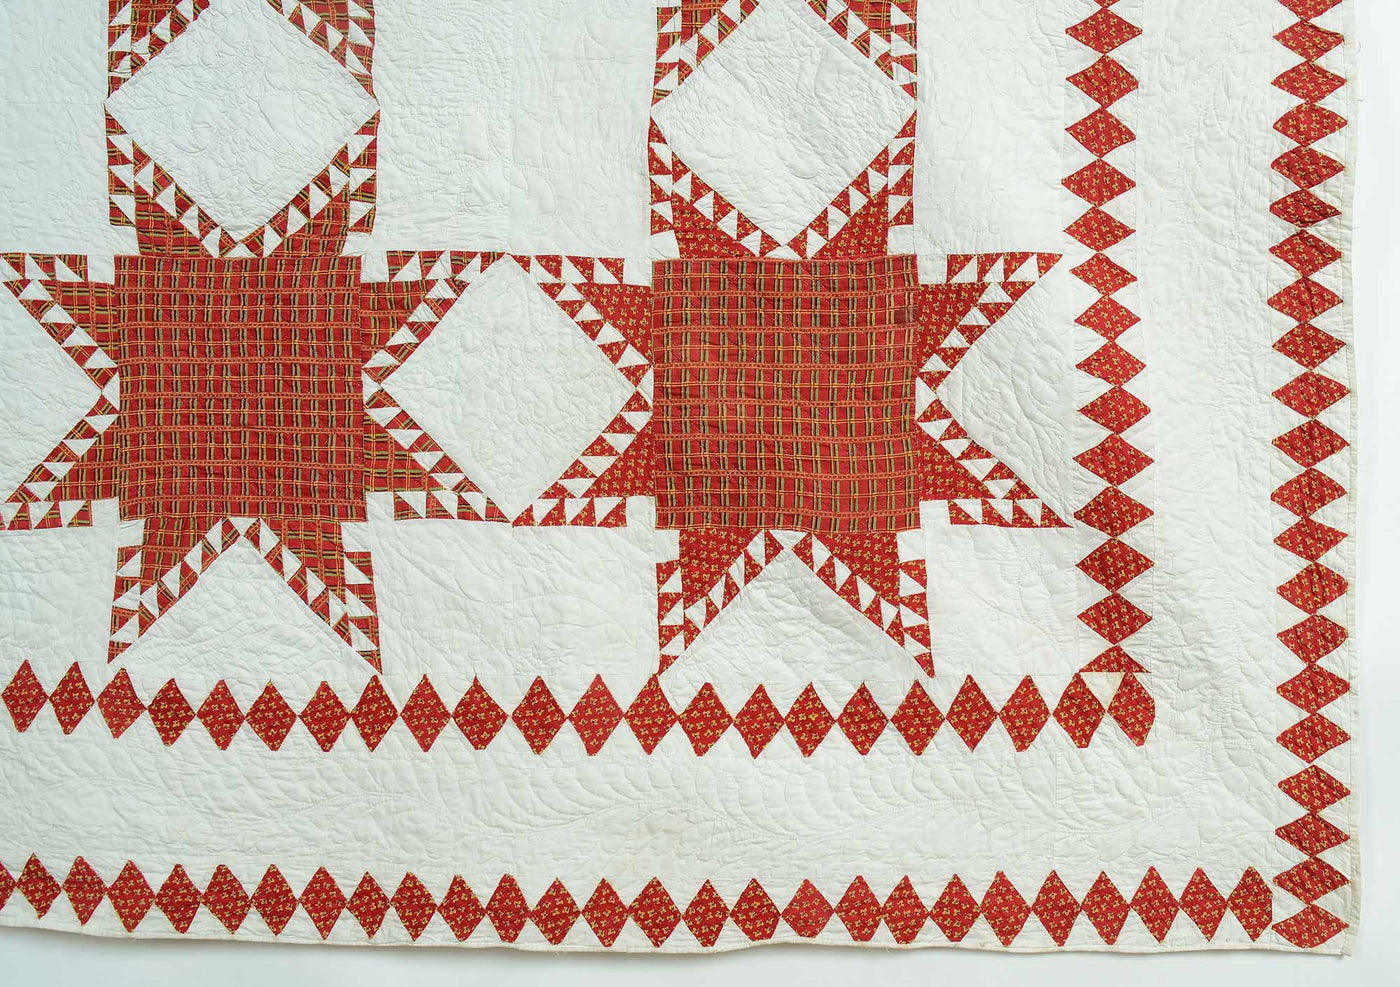 feathered-stars-quilt-1442740-bottom-right-corner-detail-4